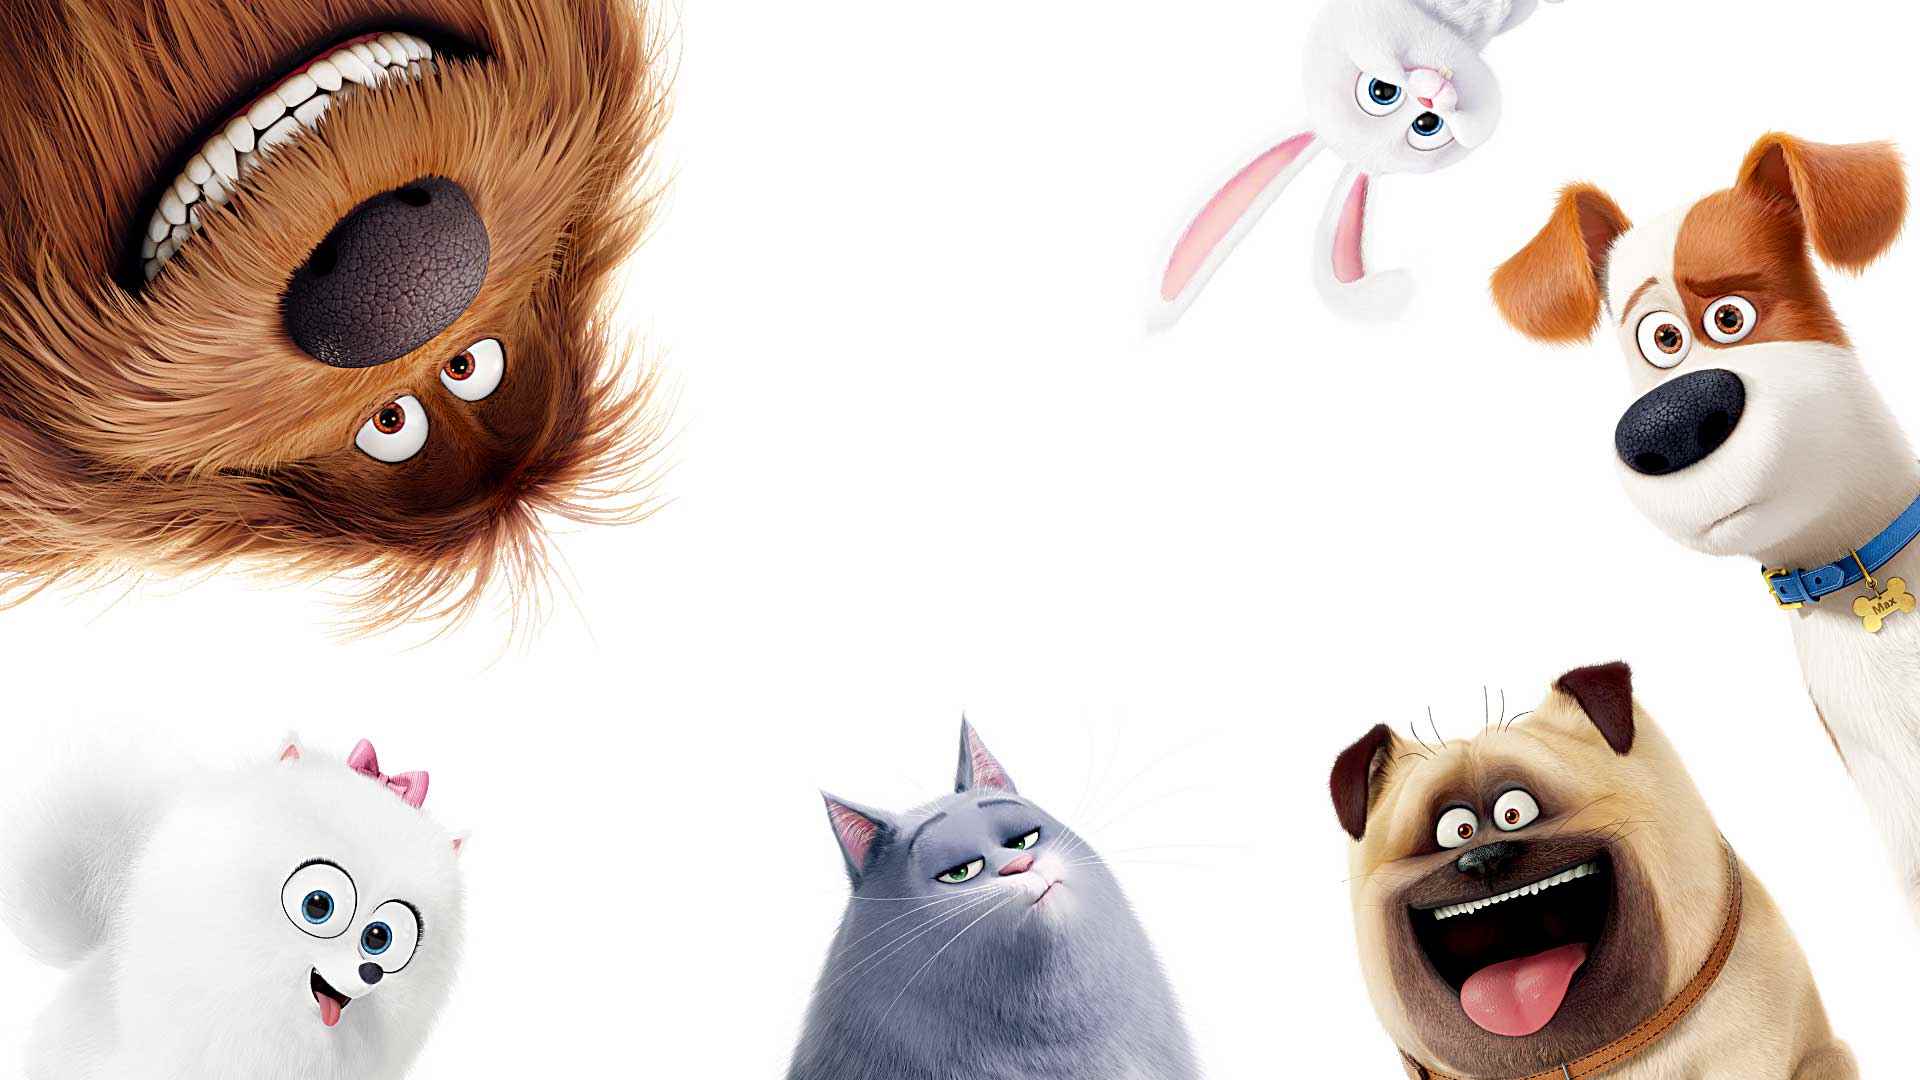  download The Secret Life of Pets Wallpapers and Background 1920x1080